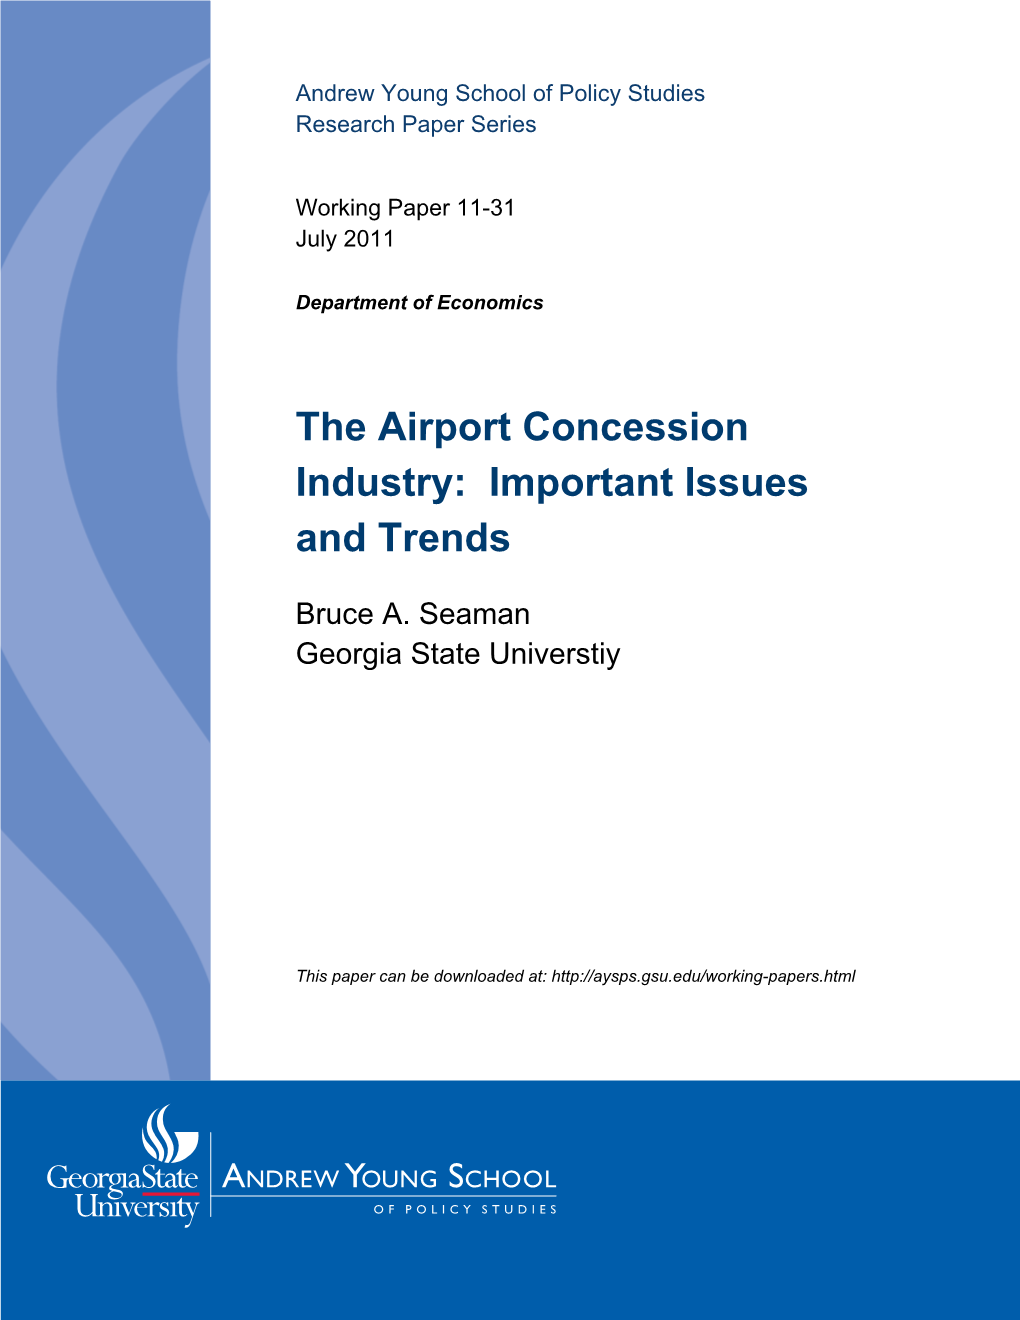 The Airport Concession Industry: Important Issues and Trends